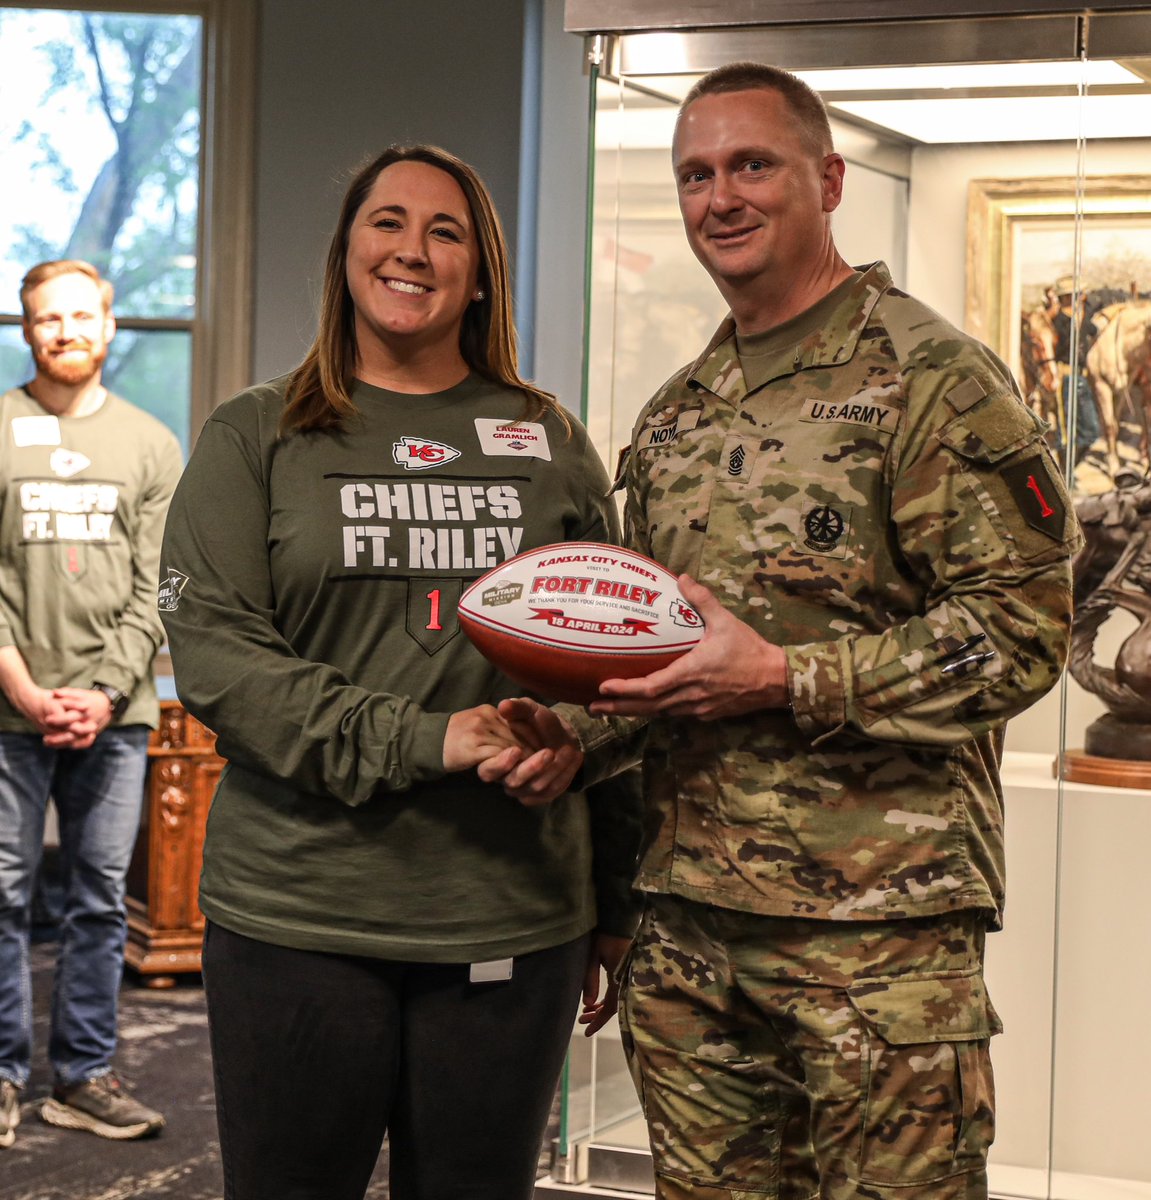 On April 18th, the @1stInfantryDiv had the honor of hosting the Kansas City Chiefs staff at Fort Riley! They had the opportunity to meet Big Red One Soldiers and share stories of strength and teamwork. We proudly host the Super Bowl champs as part of our Year of Victory!